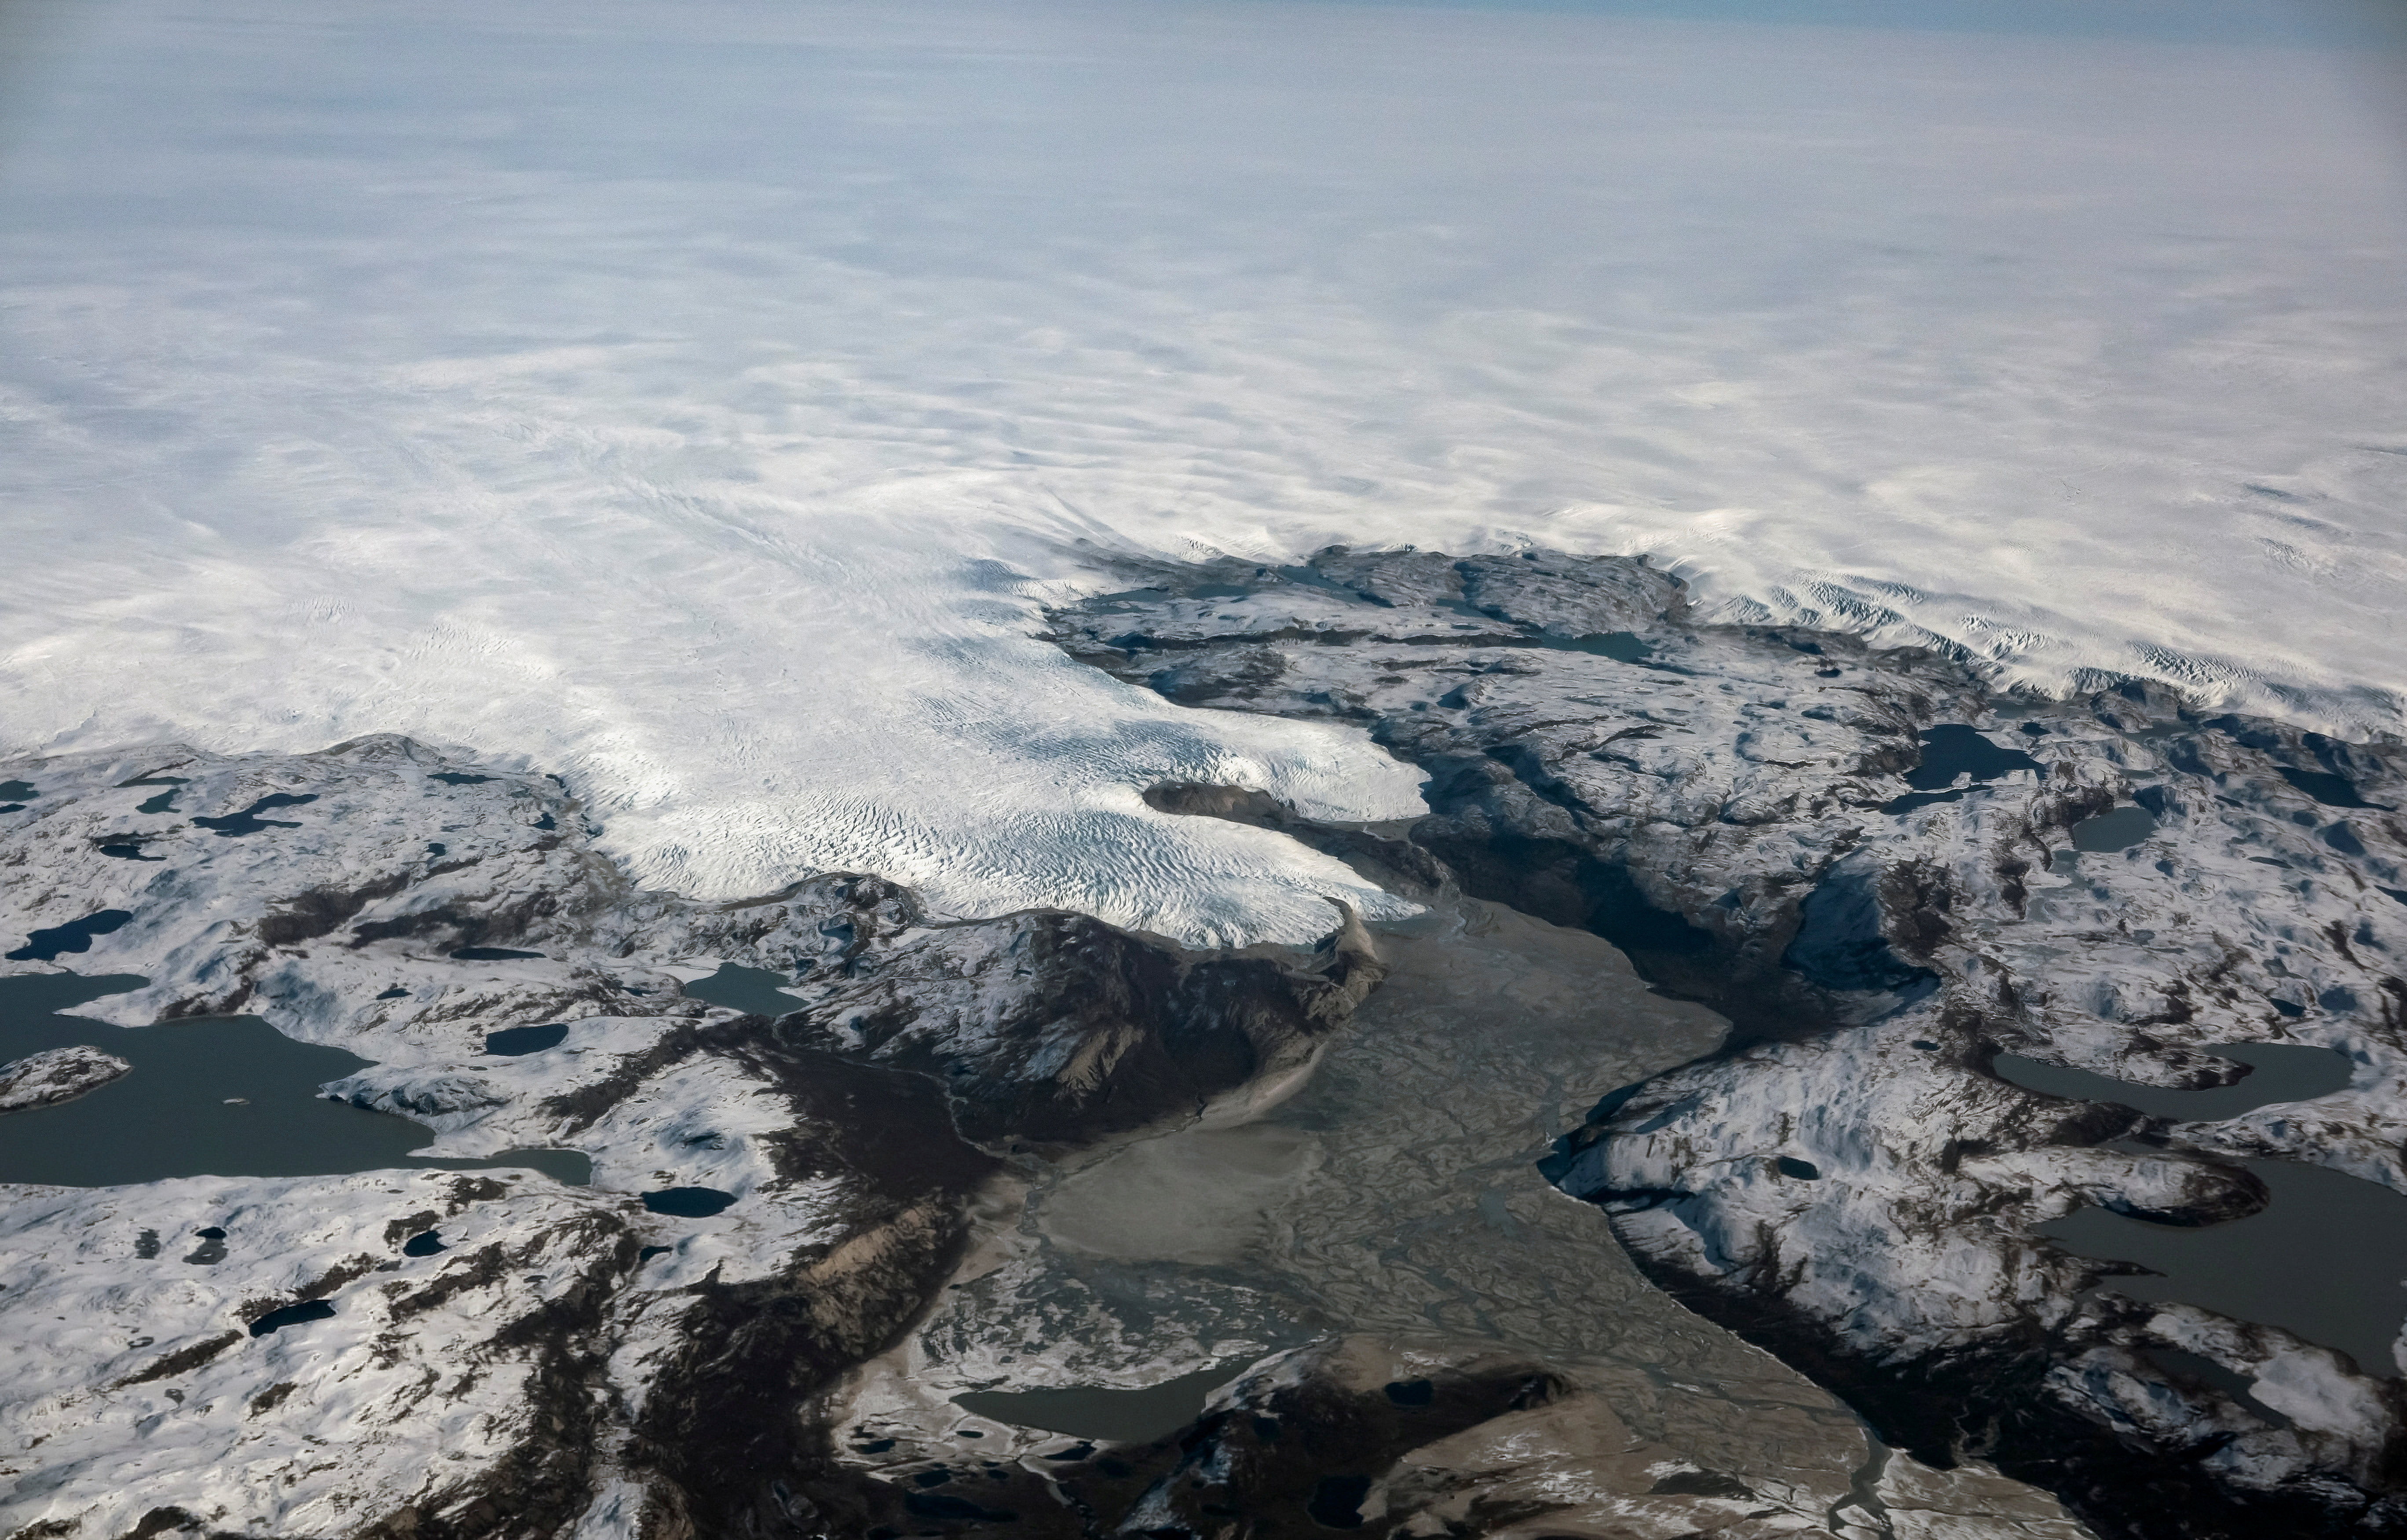 Scientists reveal how Greenland Ice Sheet has shrunk over past